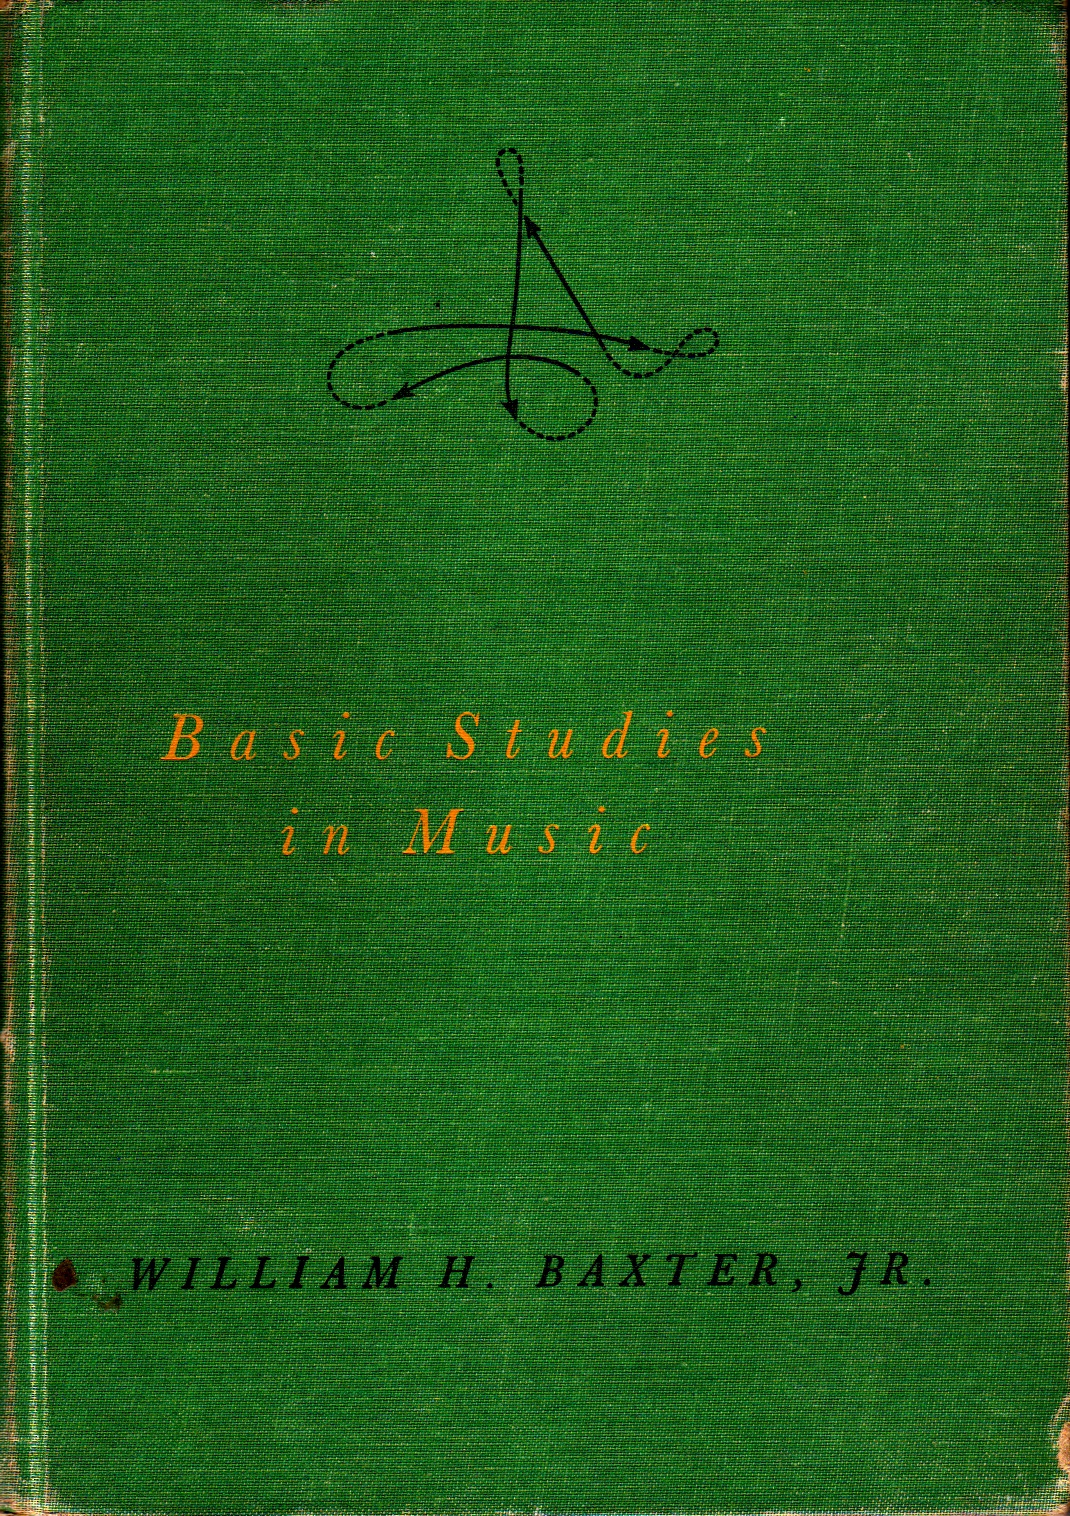 Dr. Baxter’s Music Theory Textbook